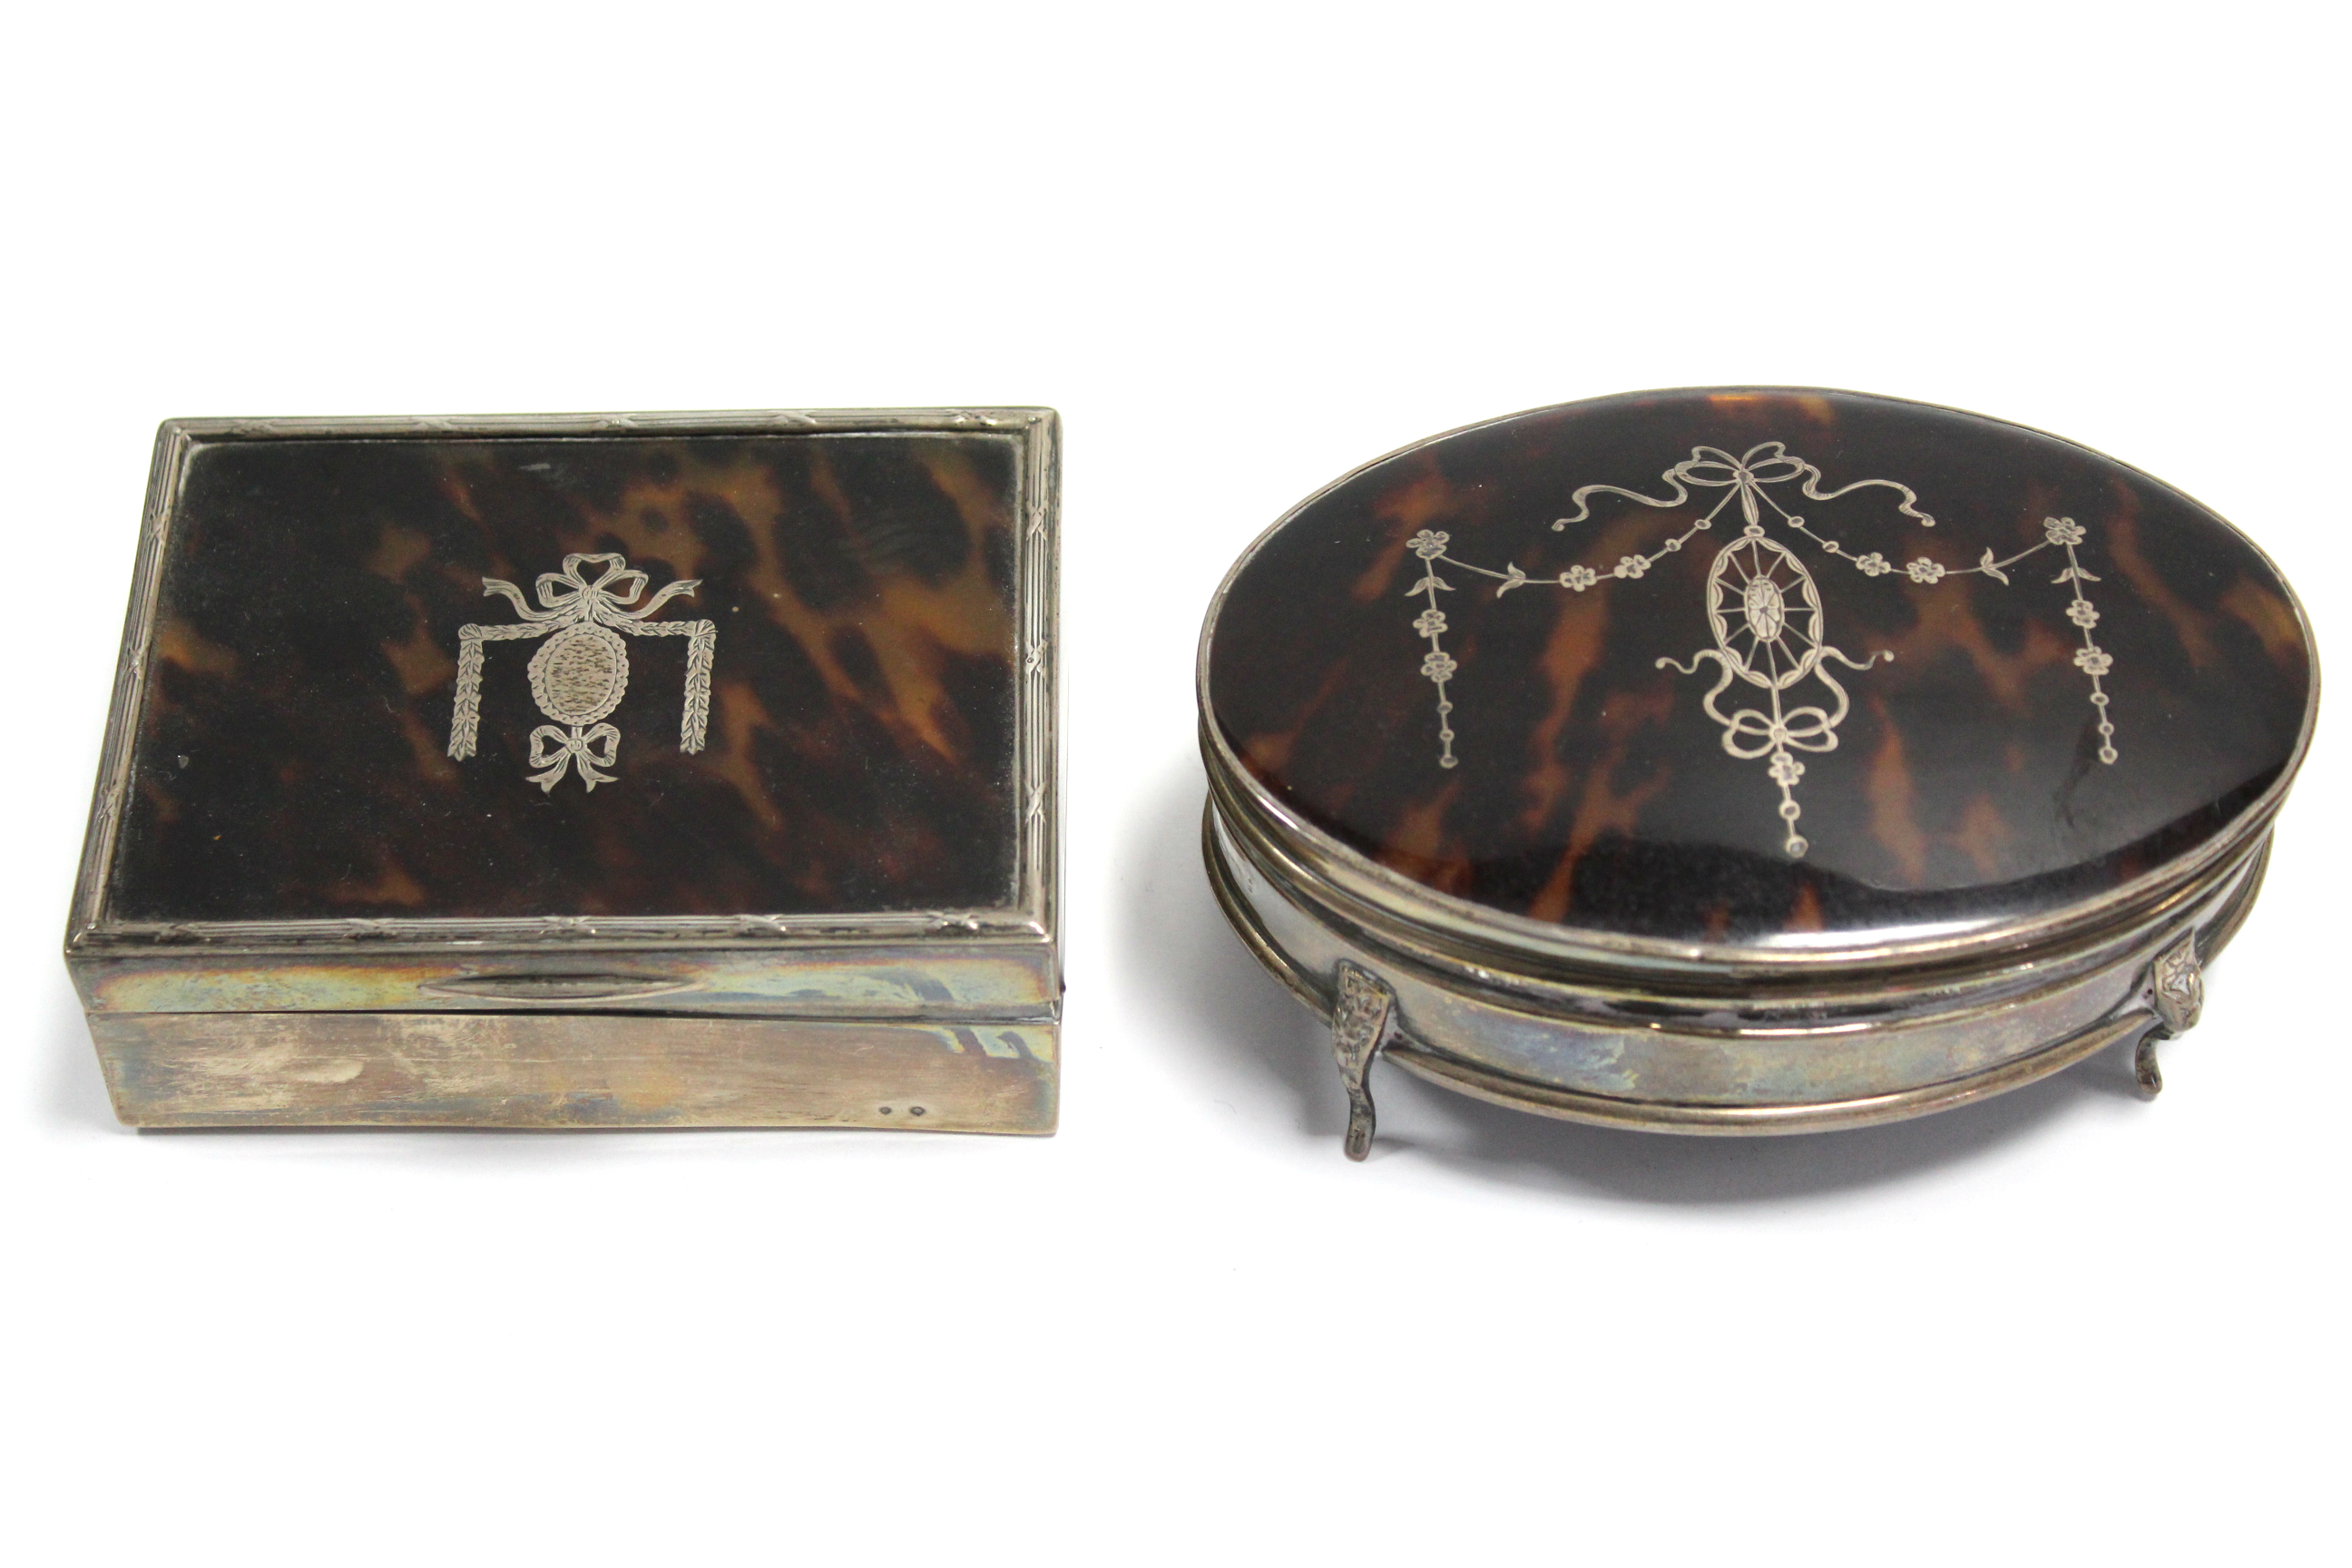 A rectangular trinket box with silver-inlaid hinged lid, 4½” wide, London 1915 by Corke Bros.; & a